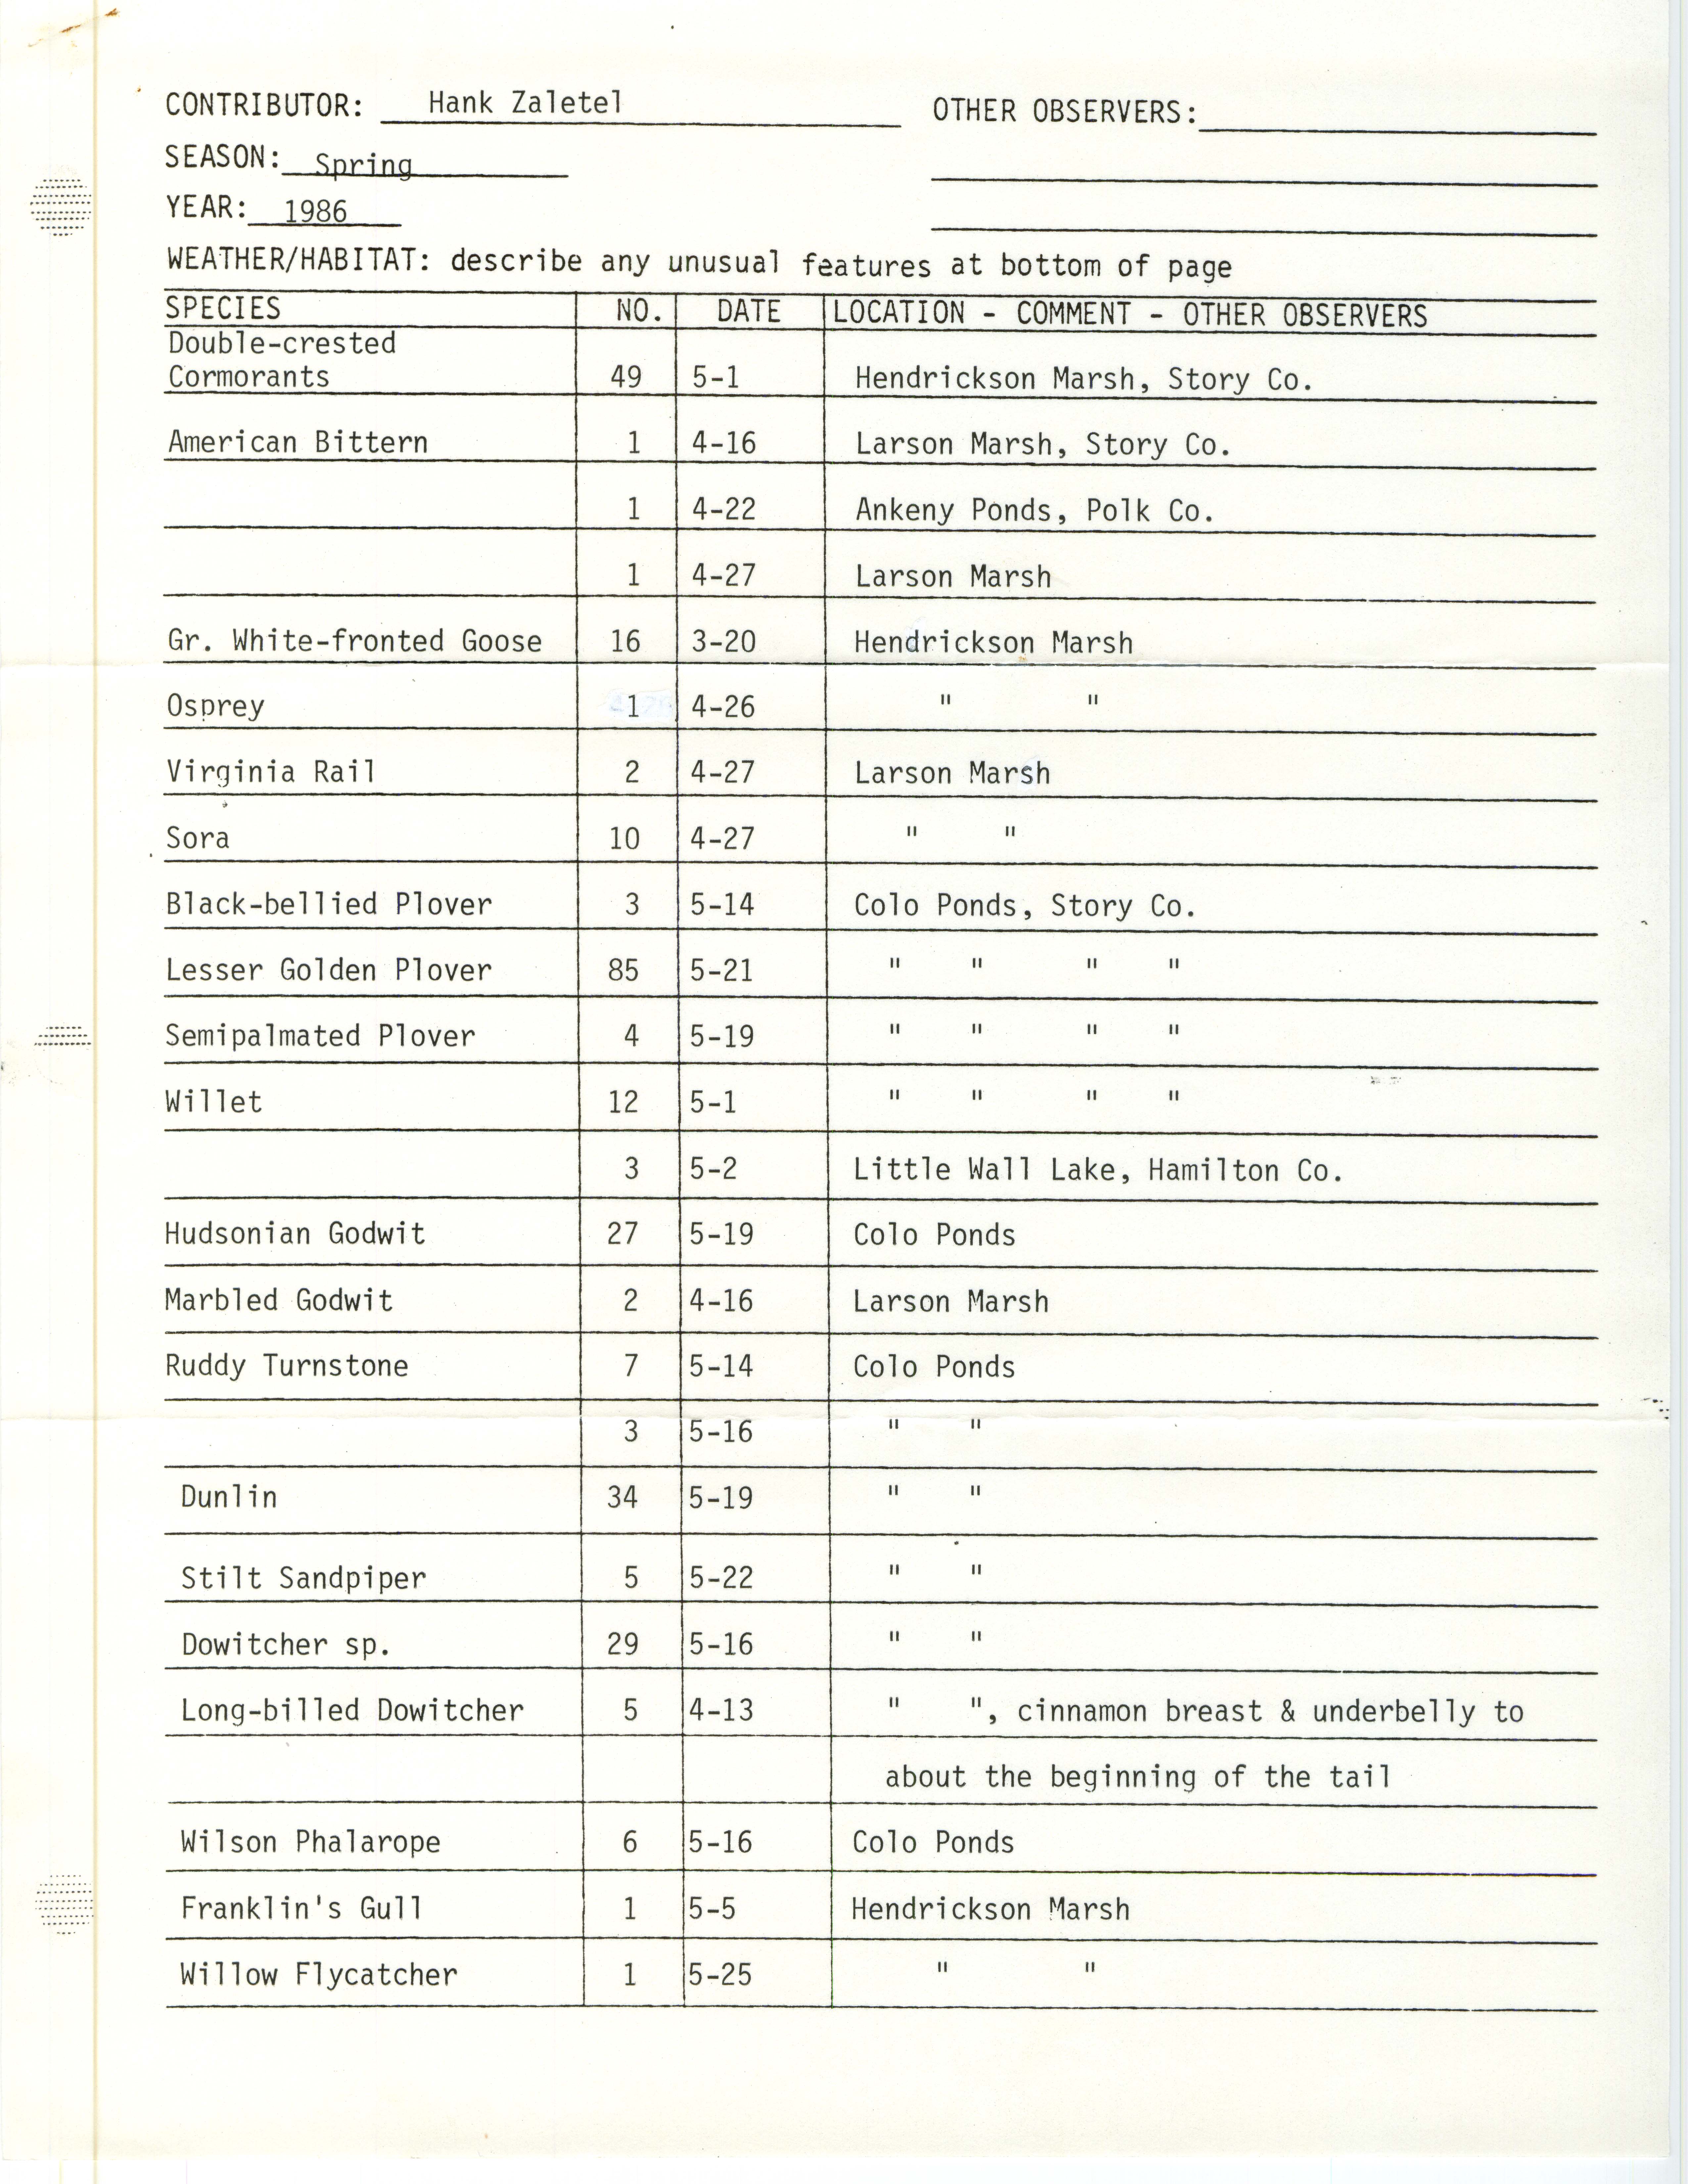 Annotated bird sighting list for Spring 1986 compiled by Hank Zaletel